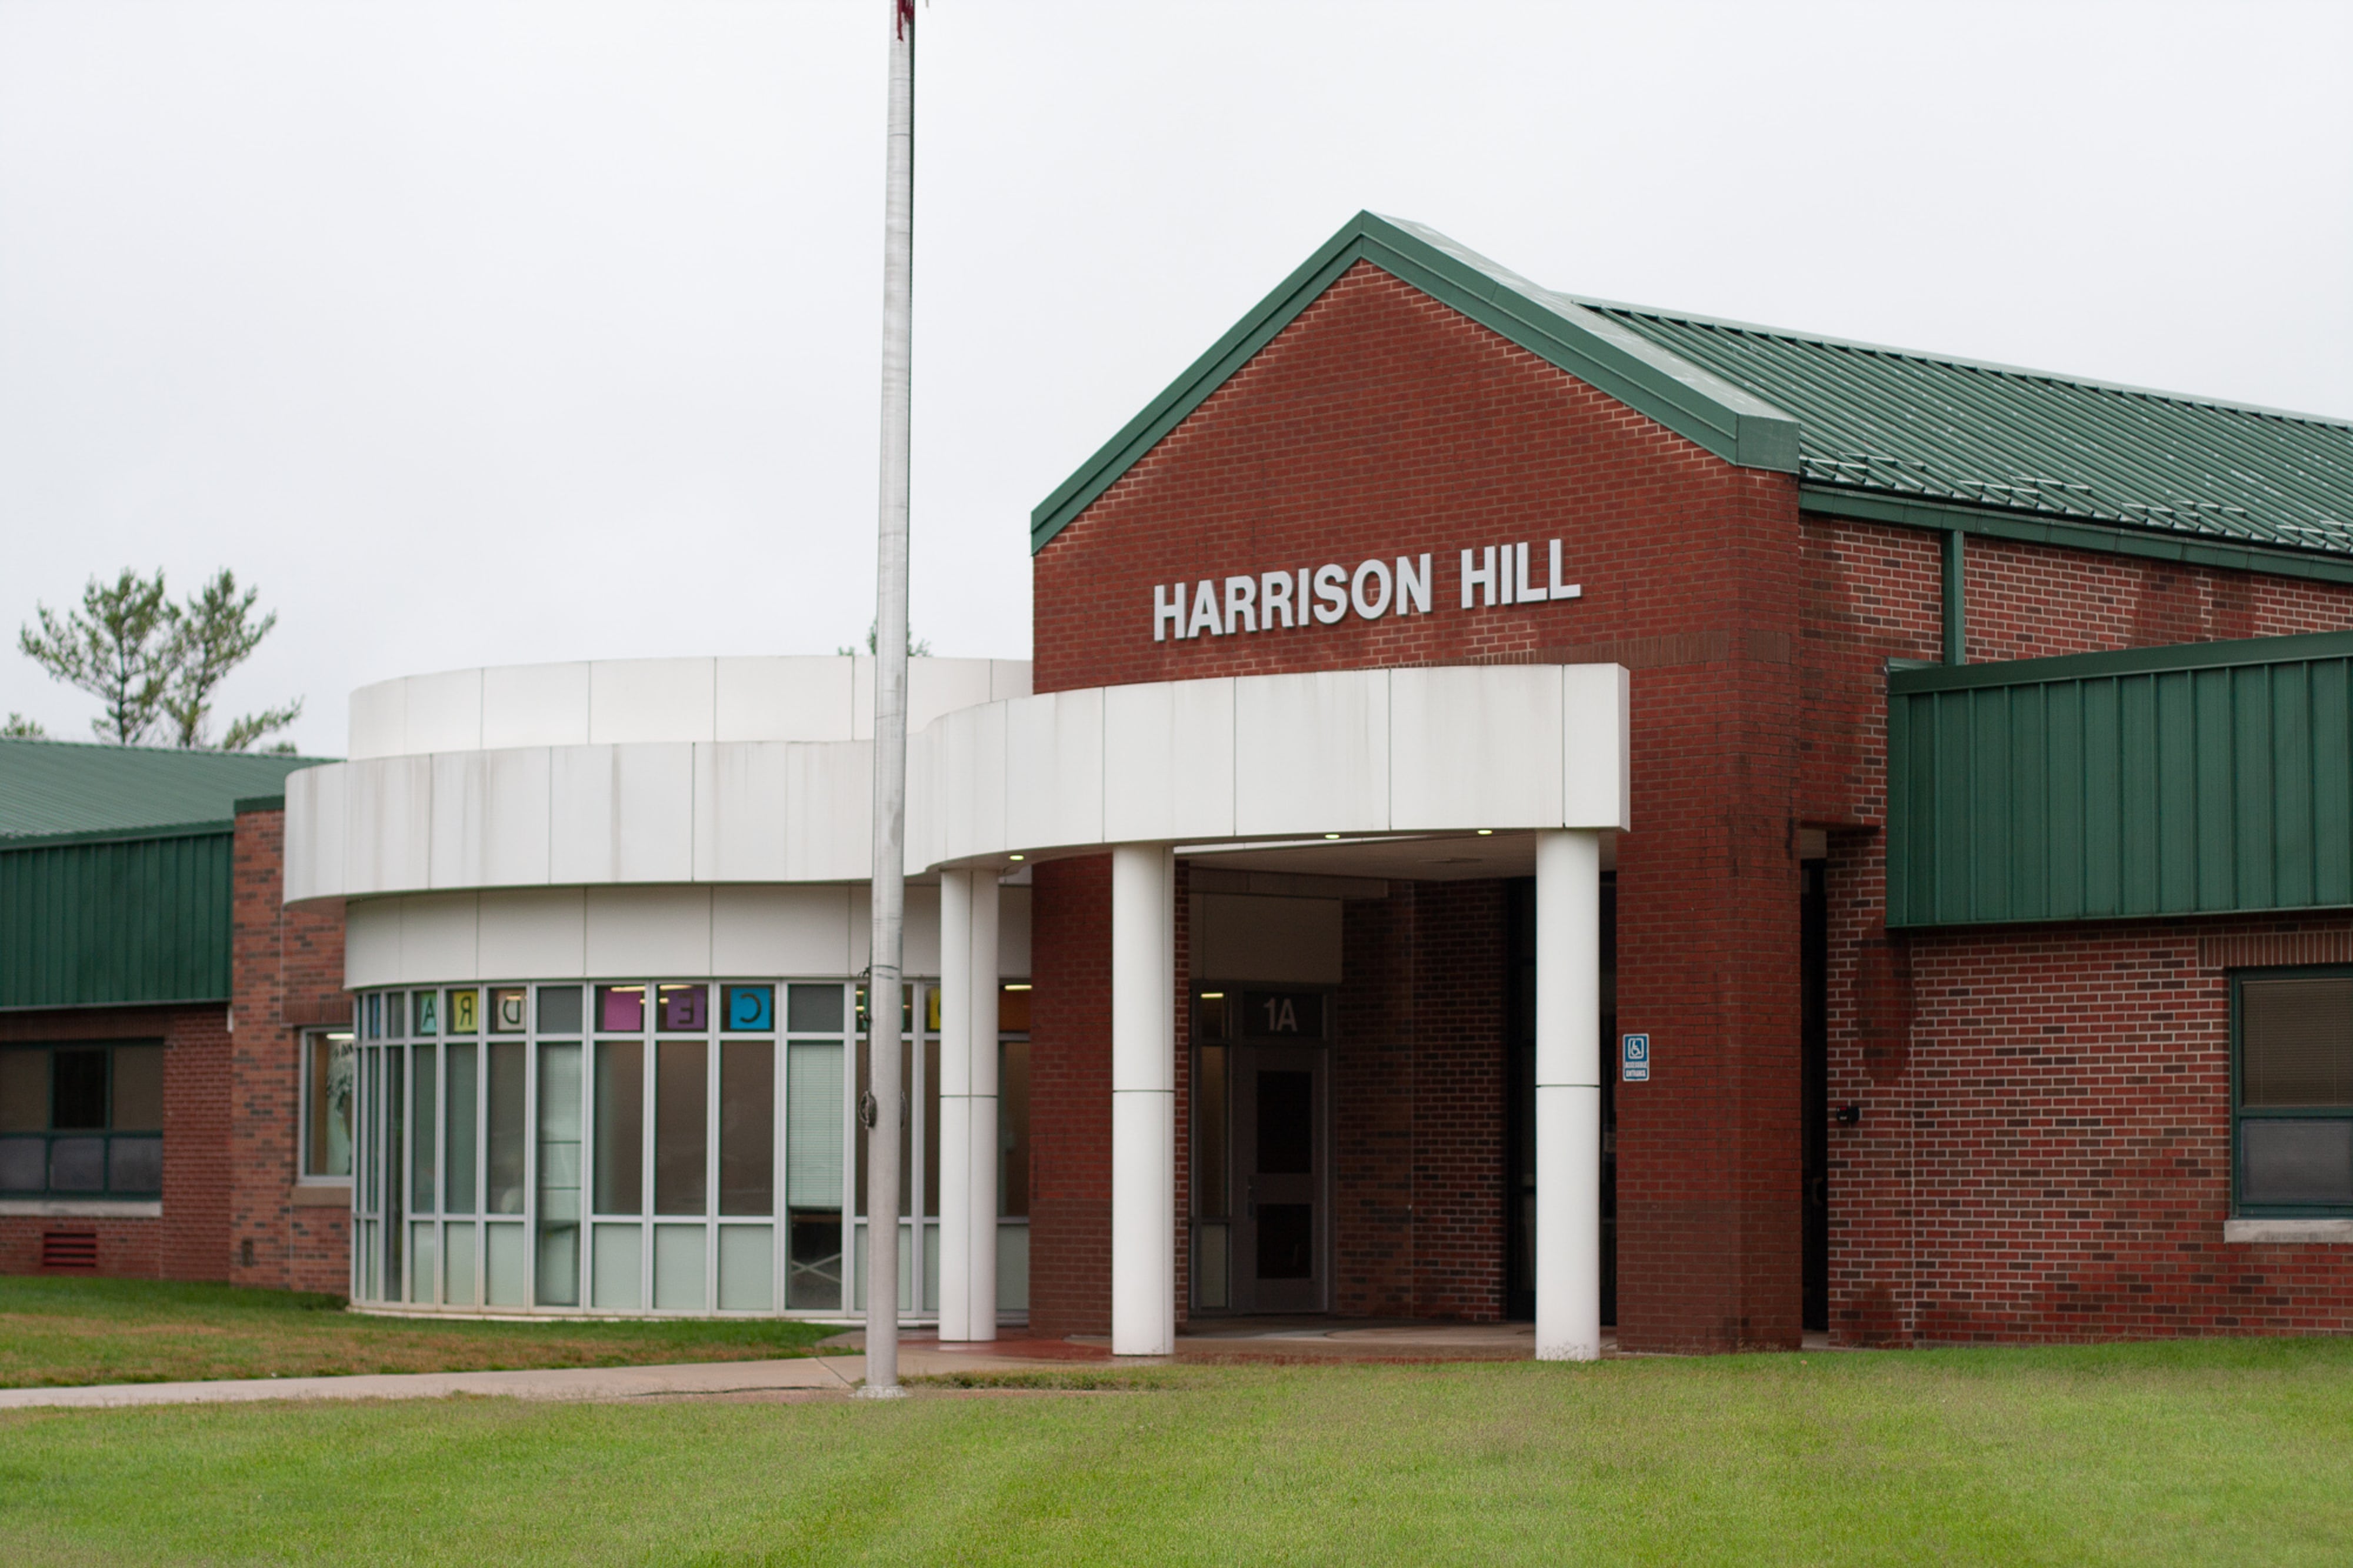 The facade of Harrison Hill Elementary School, a red brick building with a green roof.